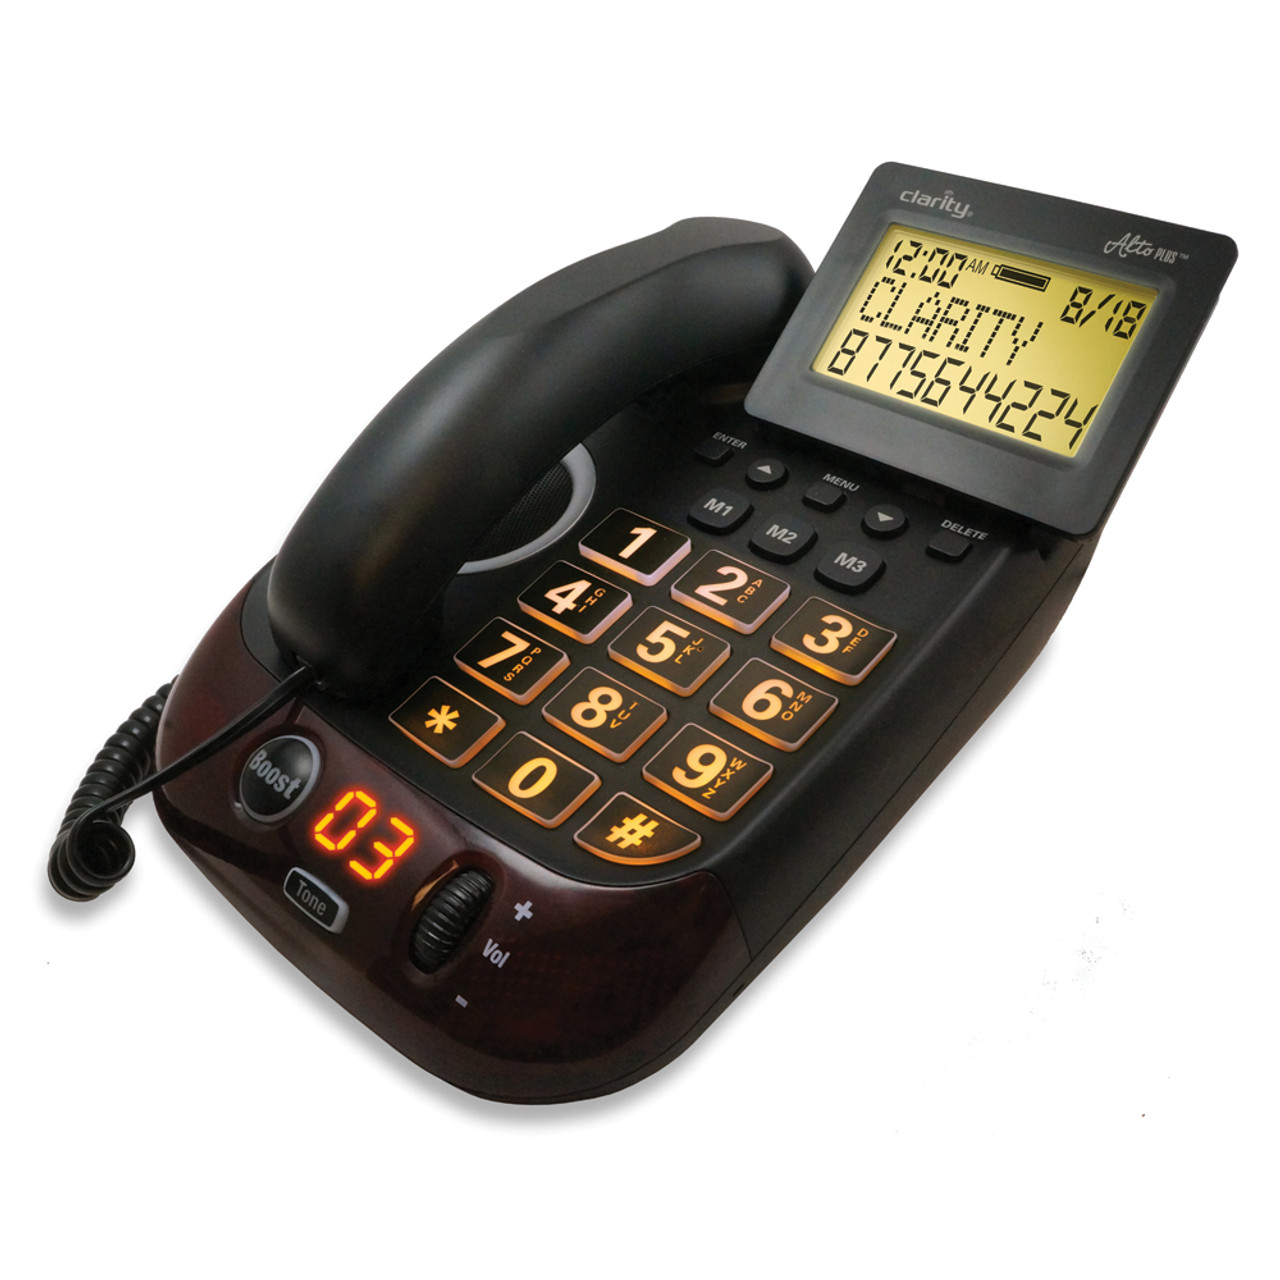 Clarity Alto Plus 53dB Corded Phone w/ Talking and Visual Caller ID